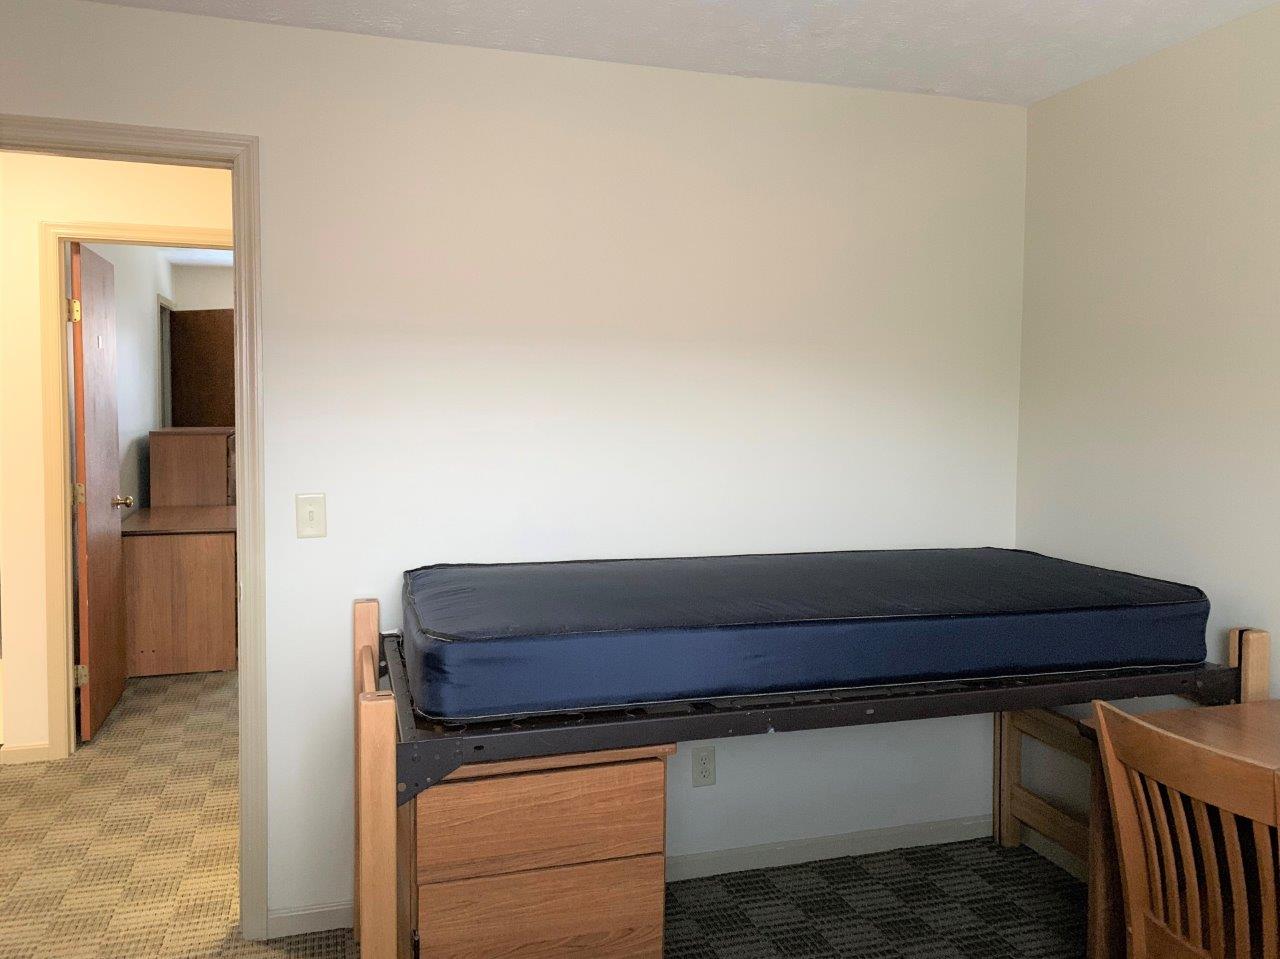 Village Apartments Double Bedroom showing a bed next to a desk